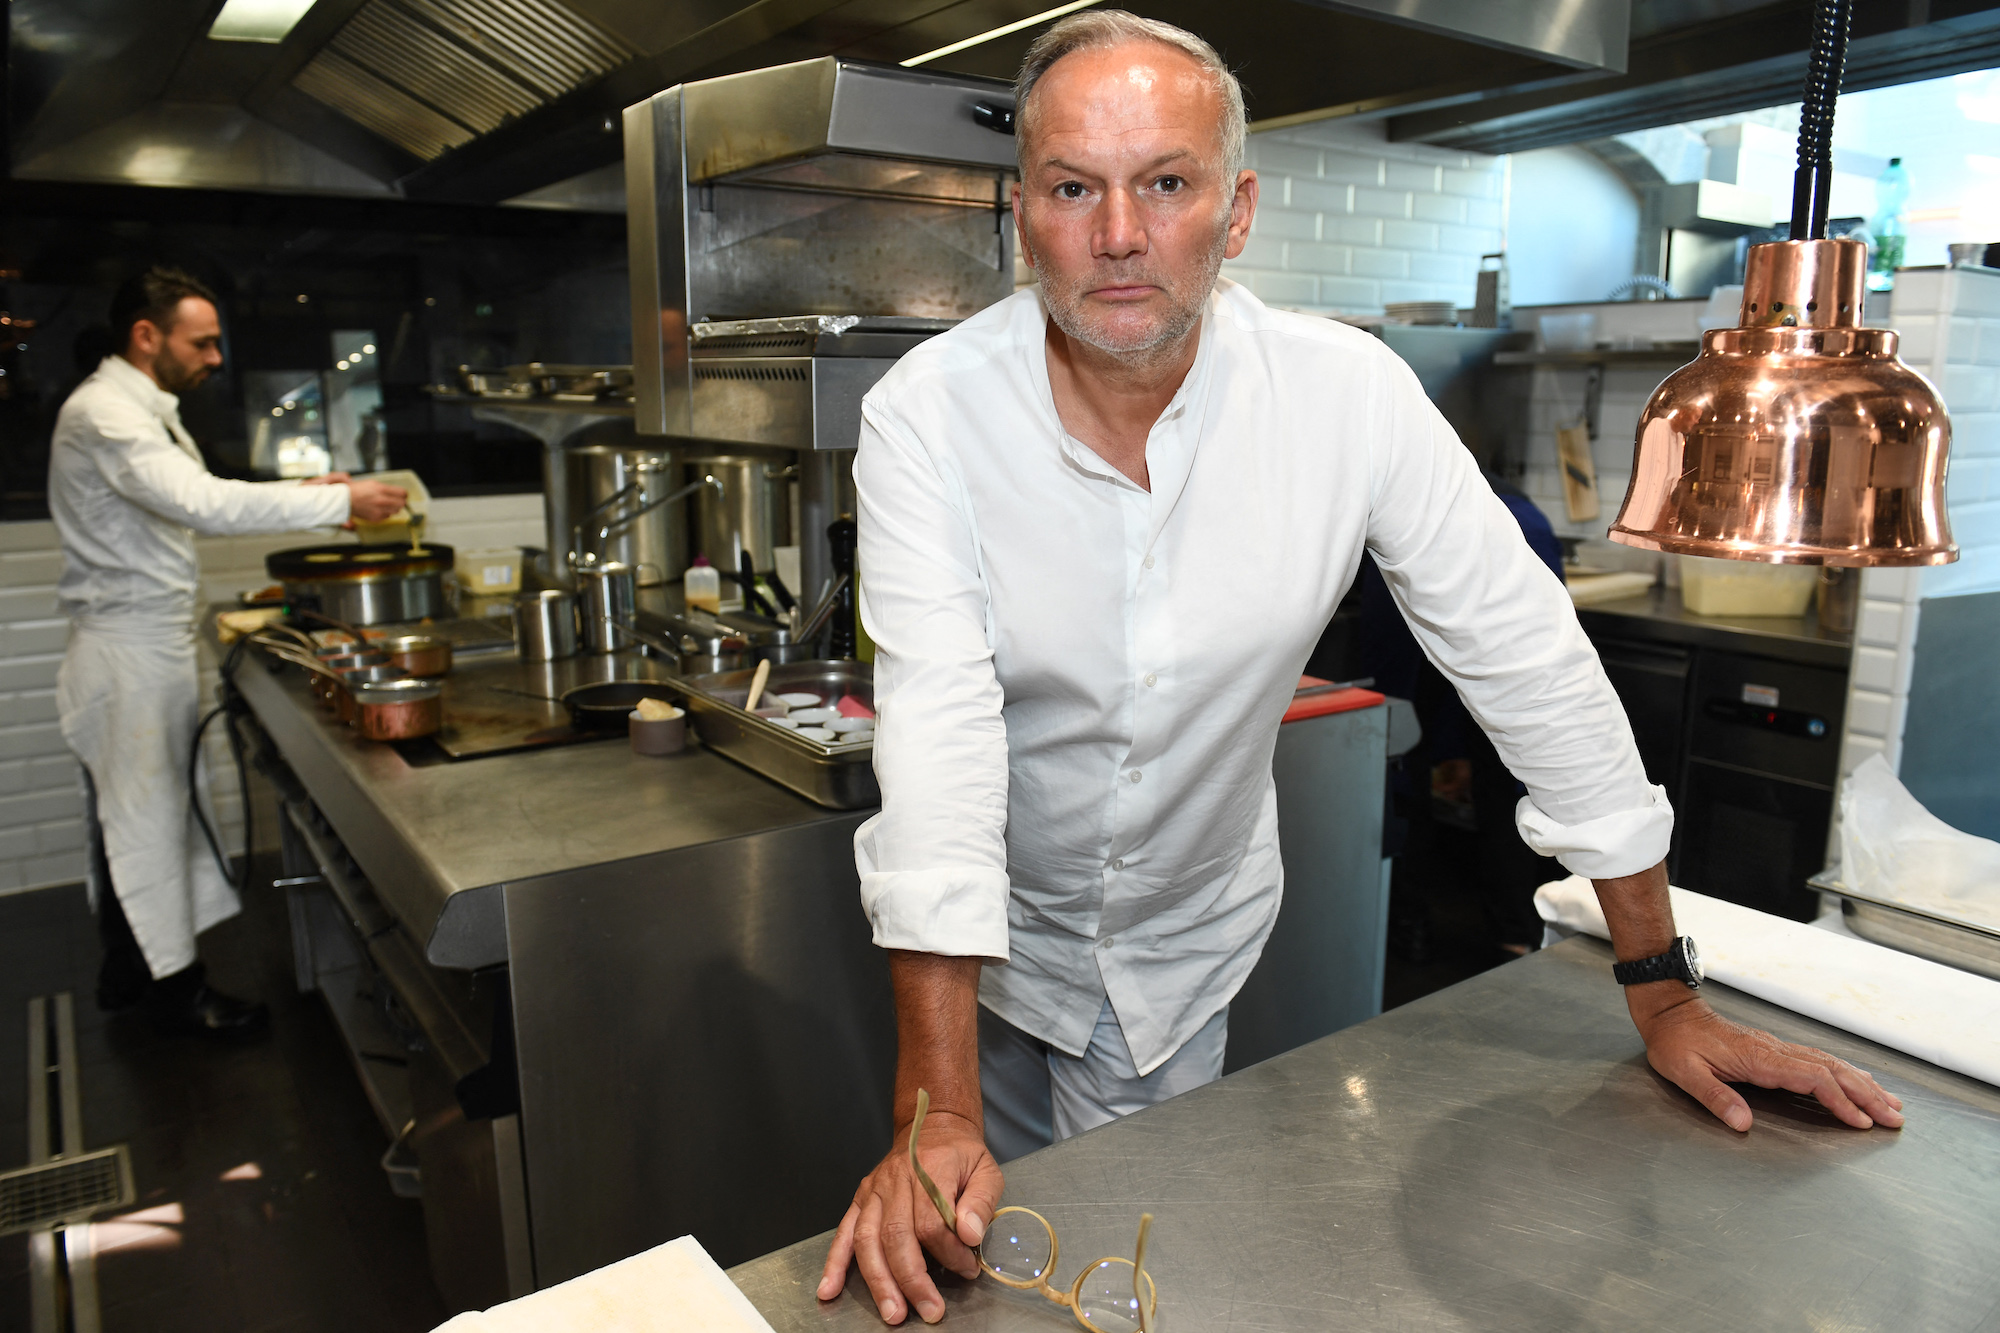 French three-star Michelin chef Christian Le Squer poses at the kitchen of the Moulin de Rosmadec's restaurant in Pont-Aven, Western France, on July 29, 2020